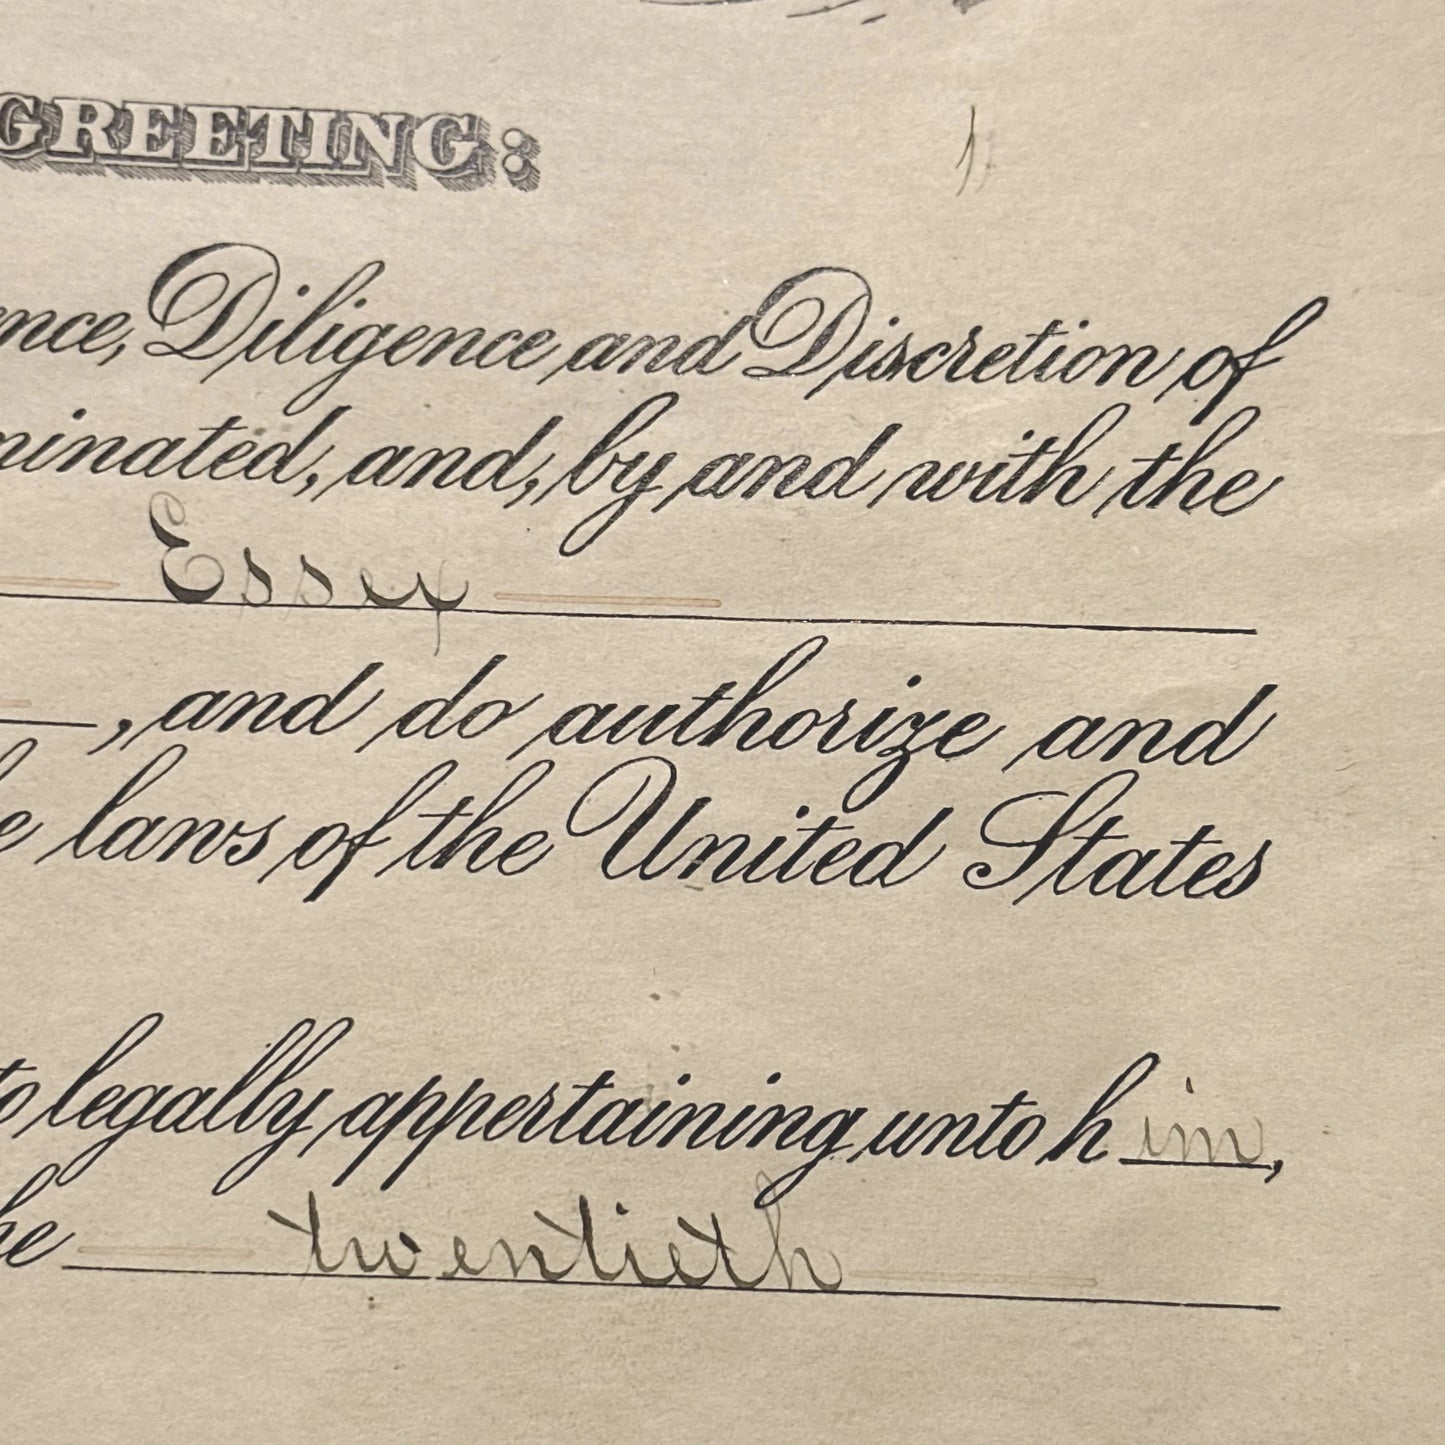 Theodore Roosevelt Presidential Appointment — Signed March 7, 1904